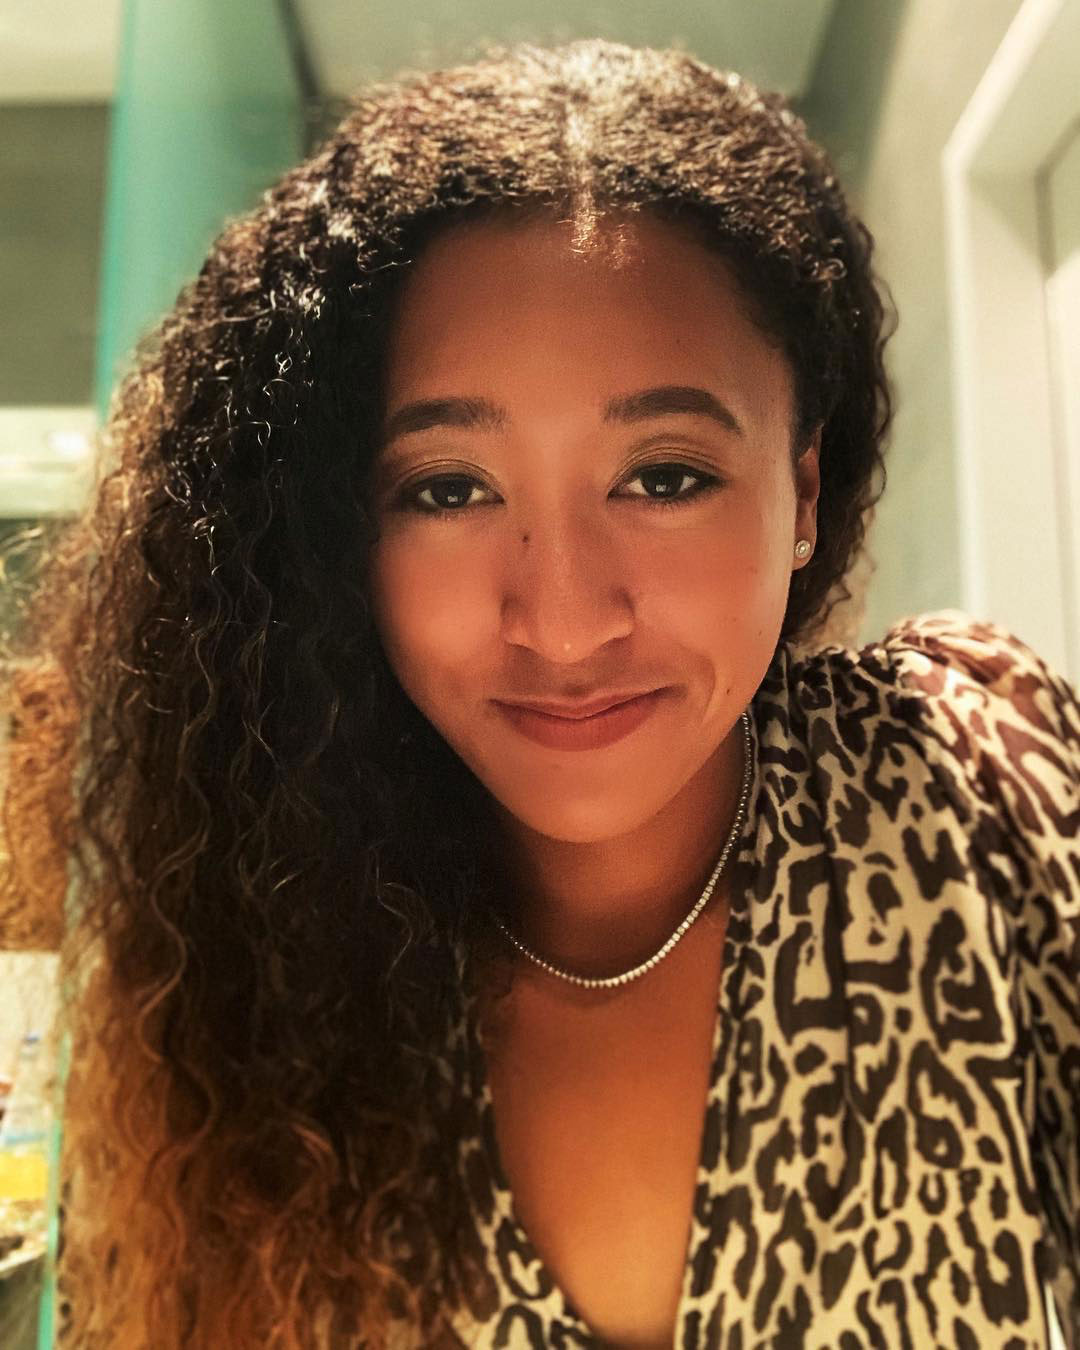 5 Things You Didn't Know About Naomi Osaka